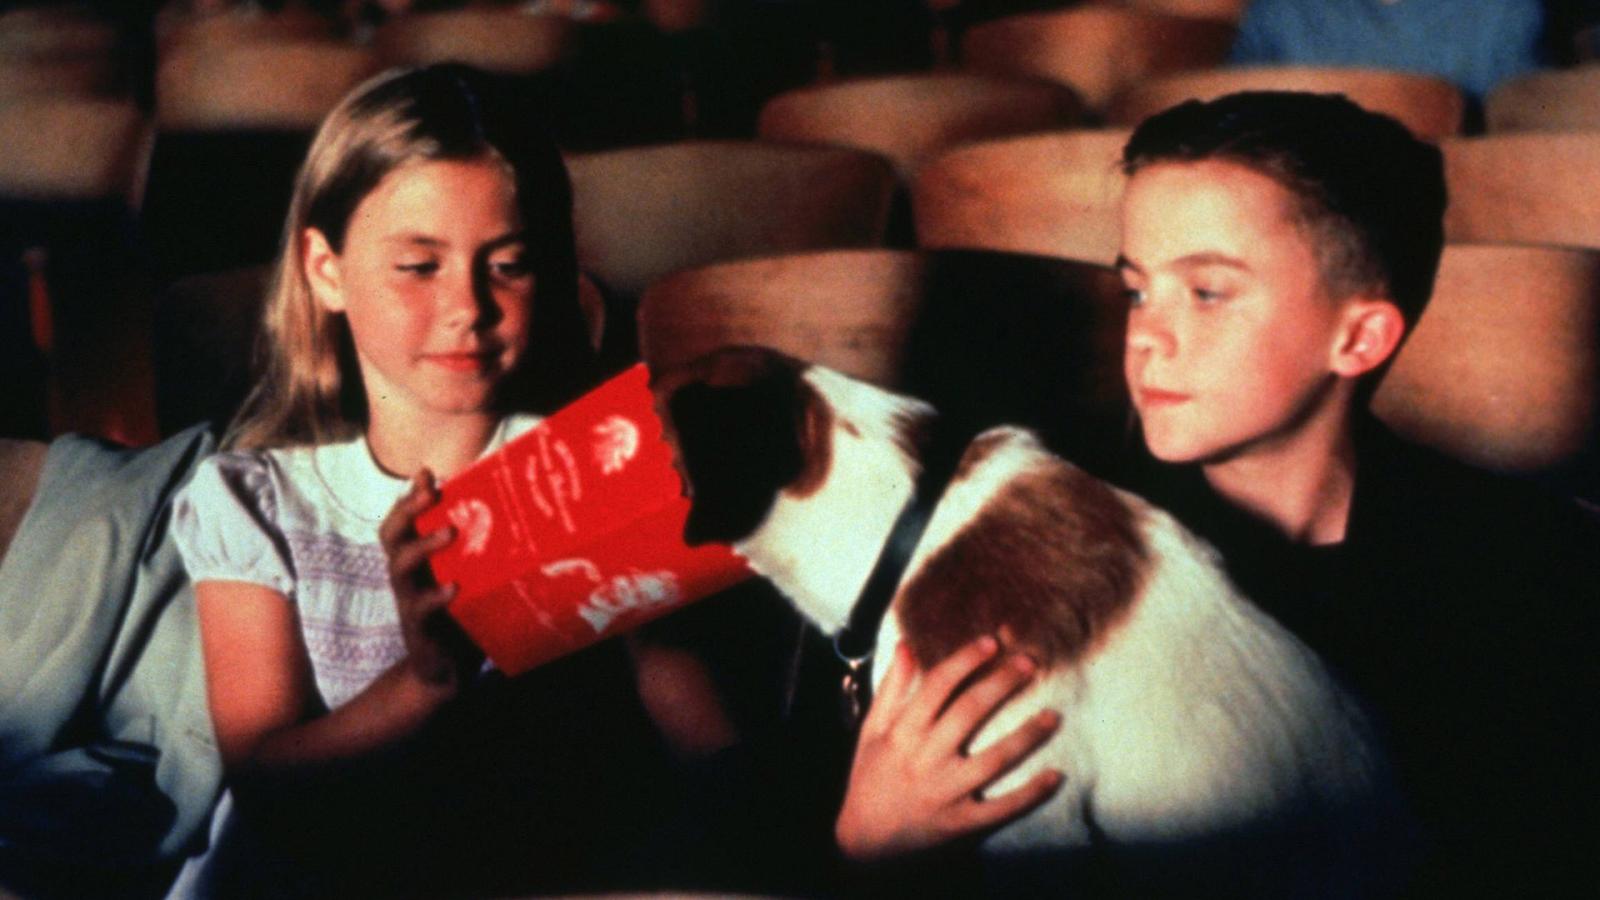 15 Lesser-Known Family Movies That Will Warm Your Heart - image 7